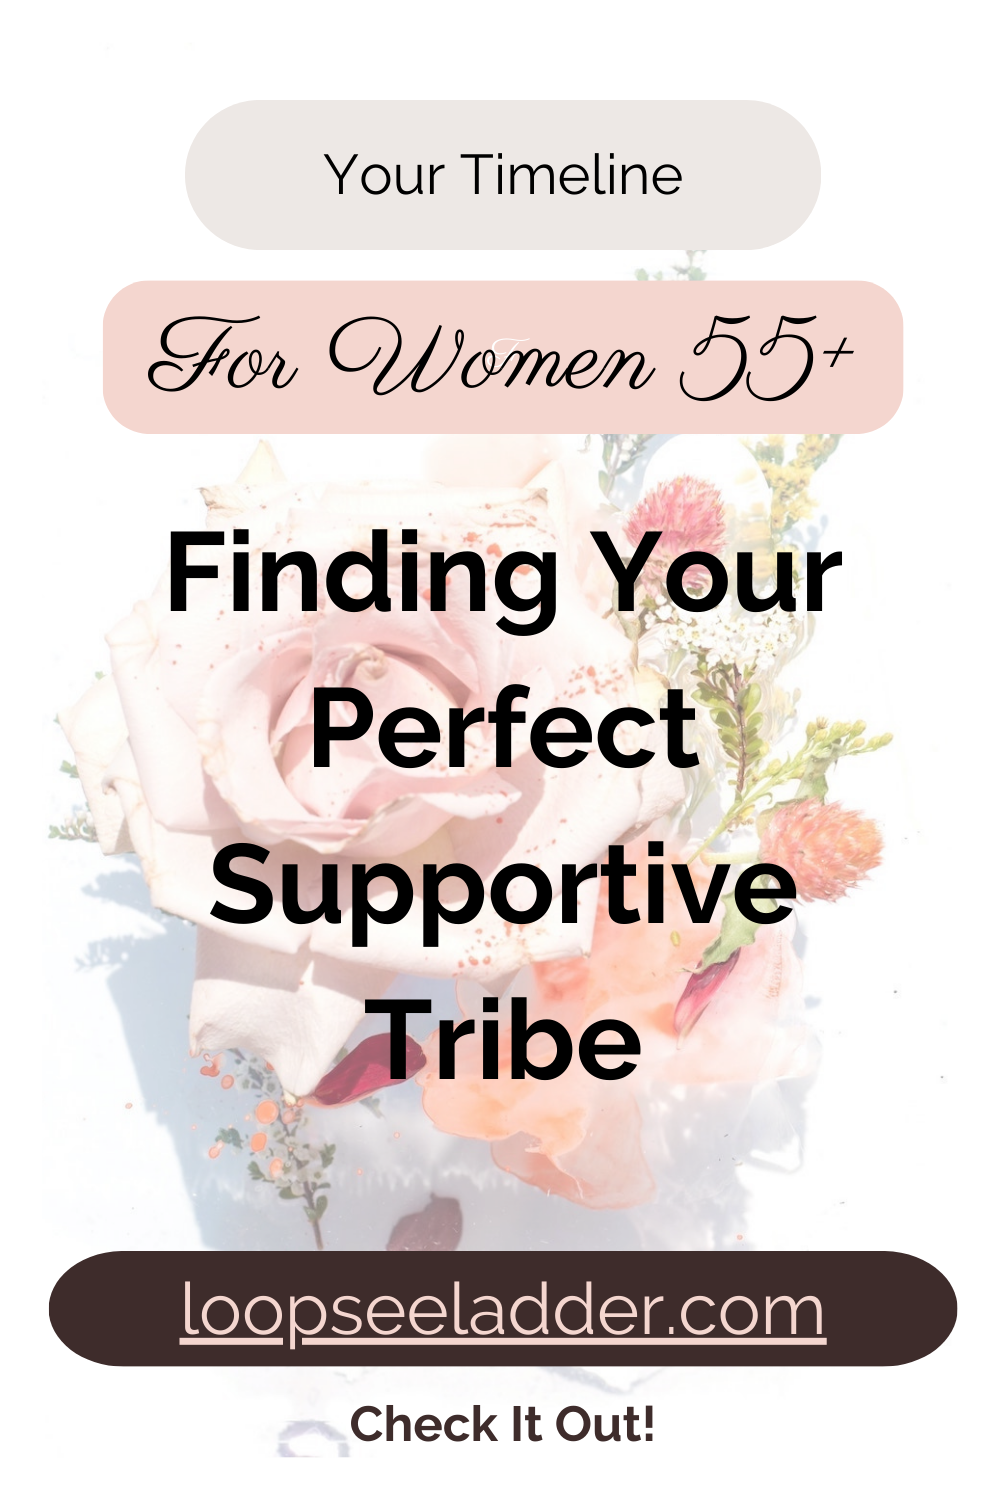 Thriving Together: How Women 55+ Can Find Their Perfect Supportive Tribe